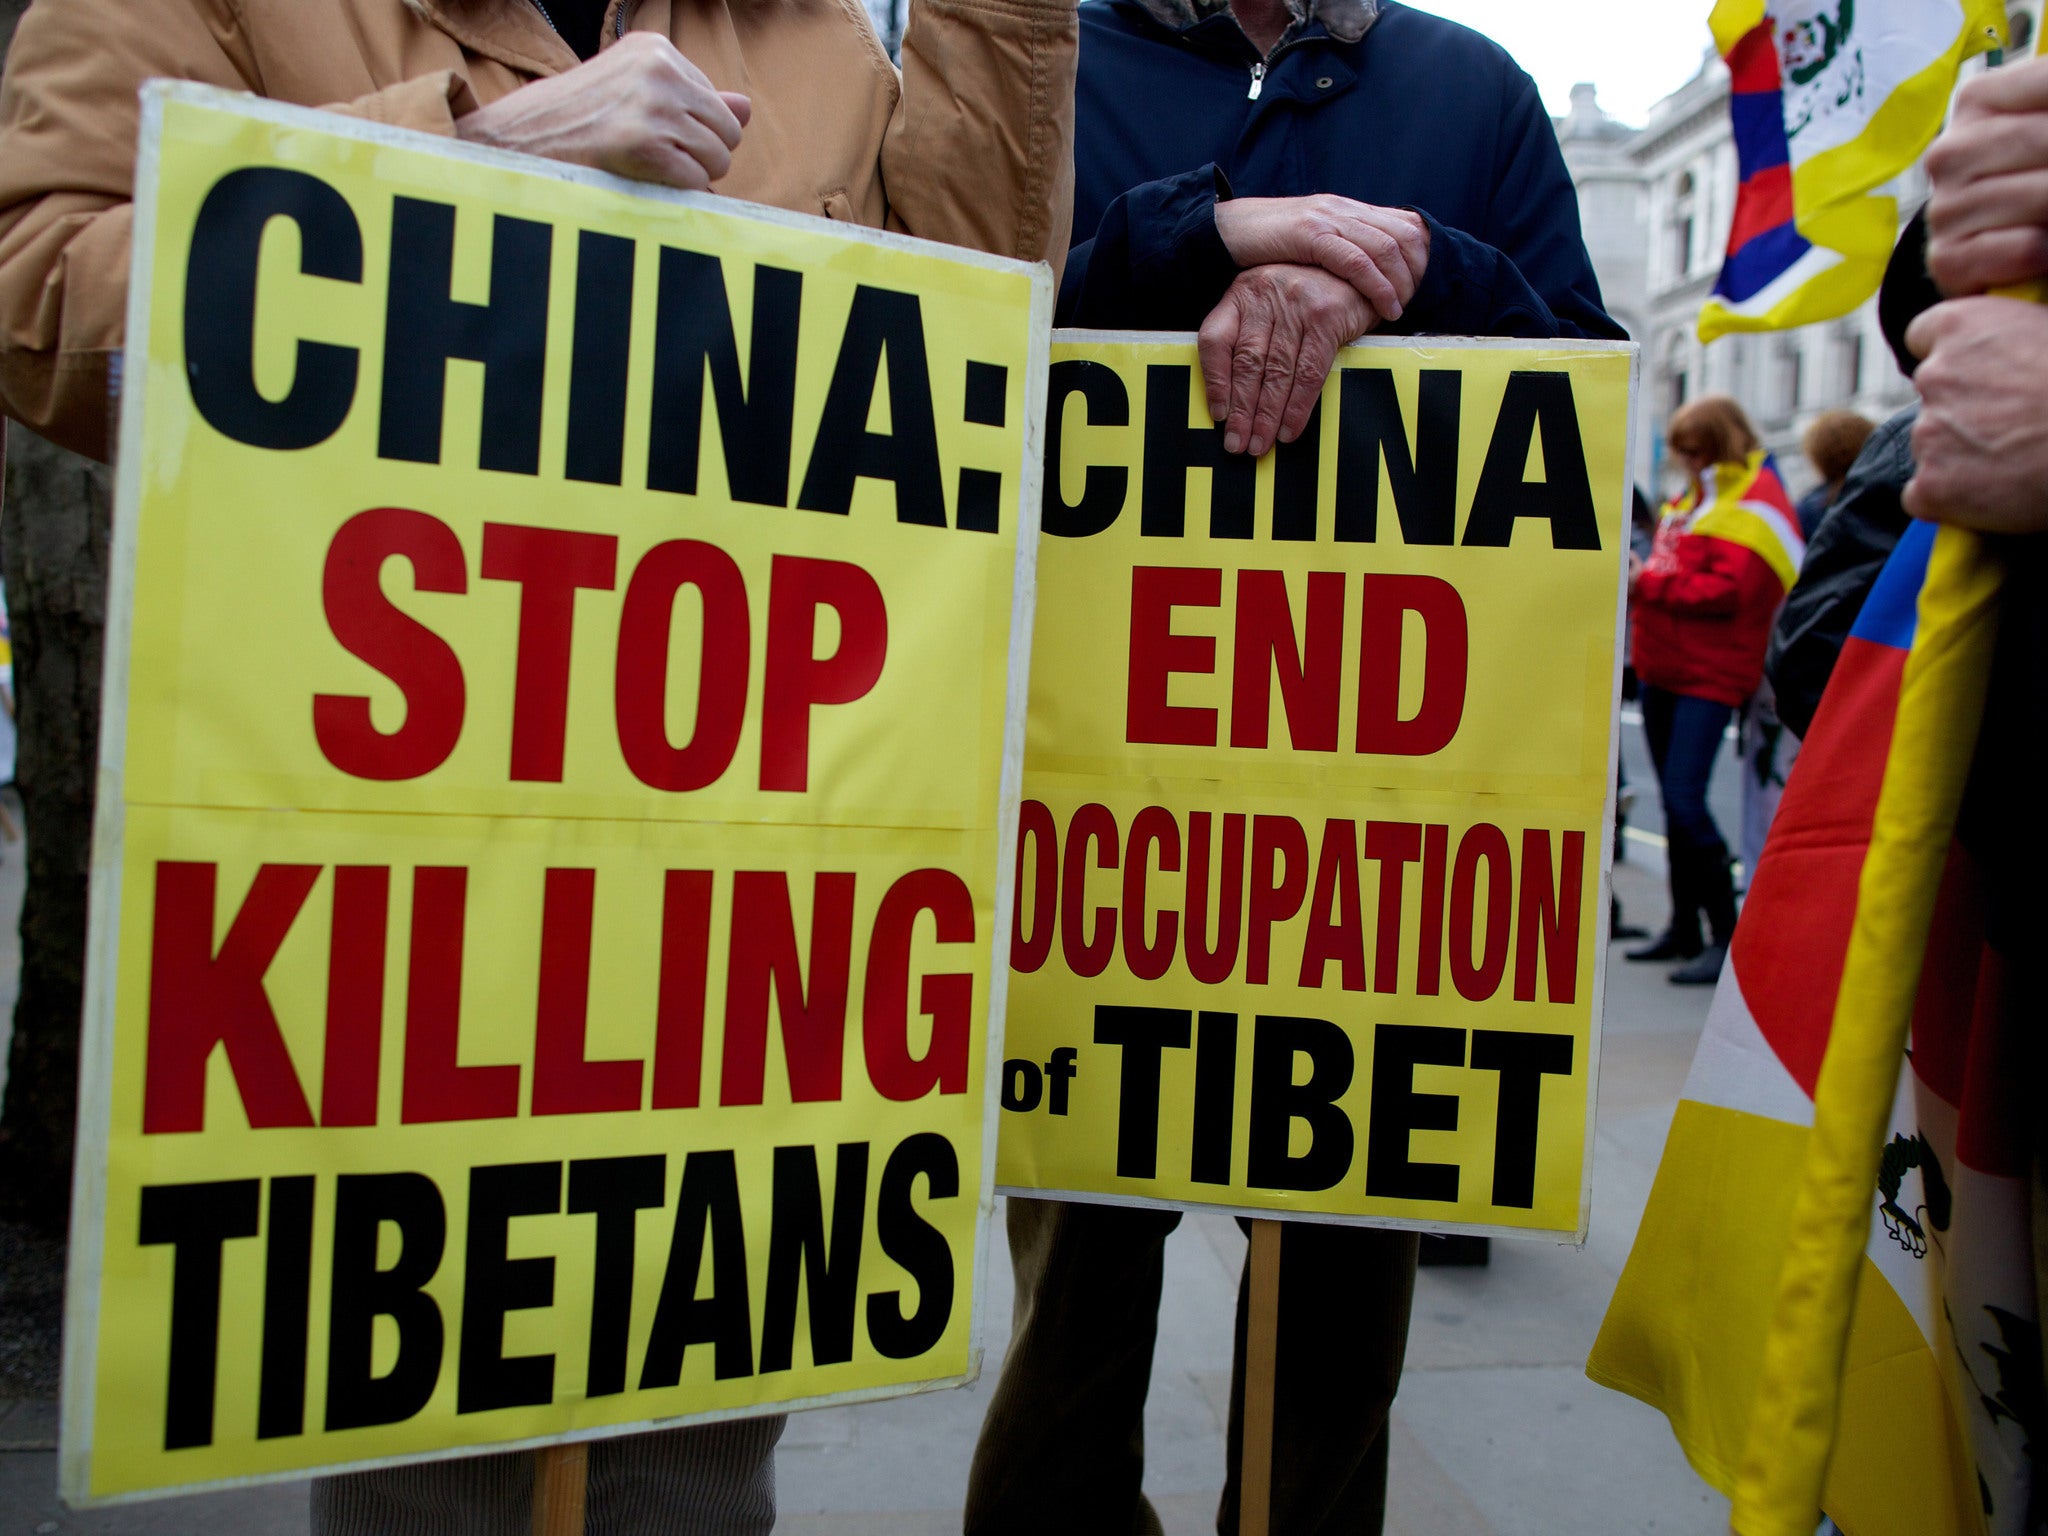 Campaigners have spent over 50 years calling for an end to the Chinese occupation of Tibet